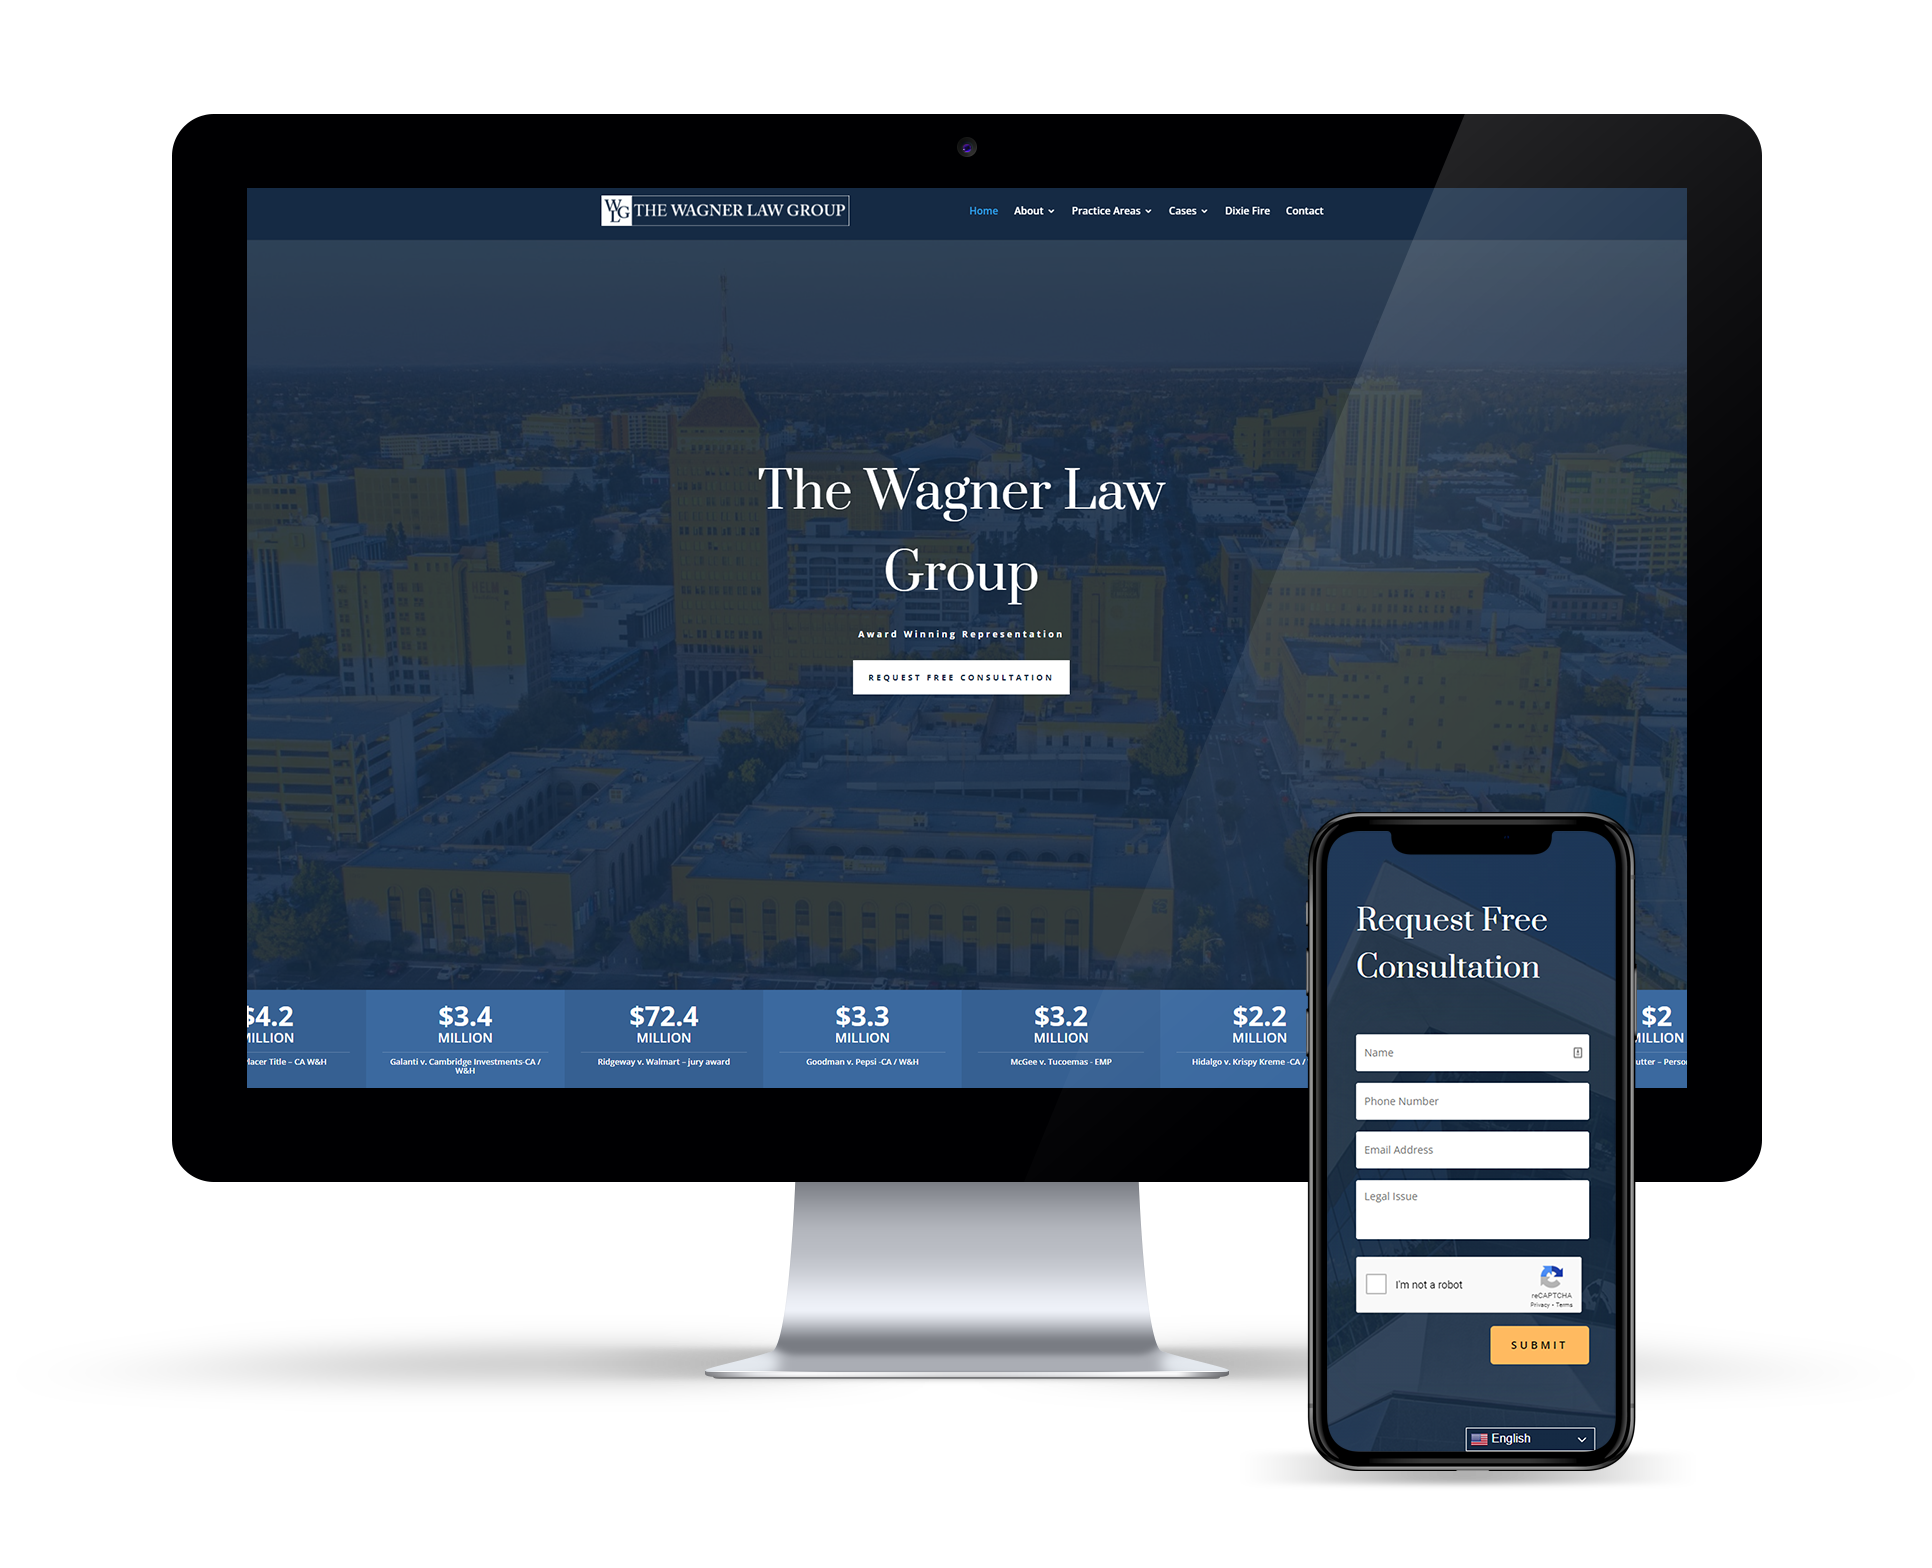 The Wagner Law Group